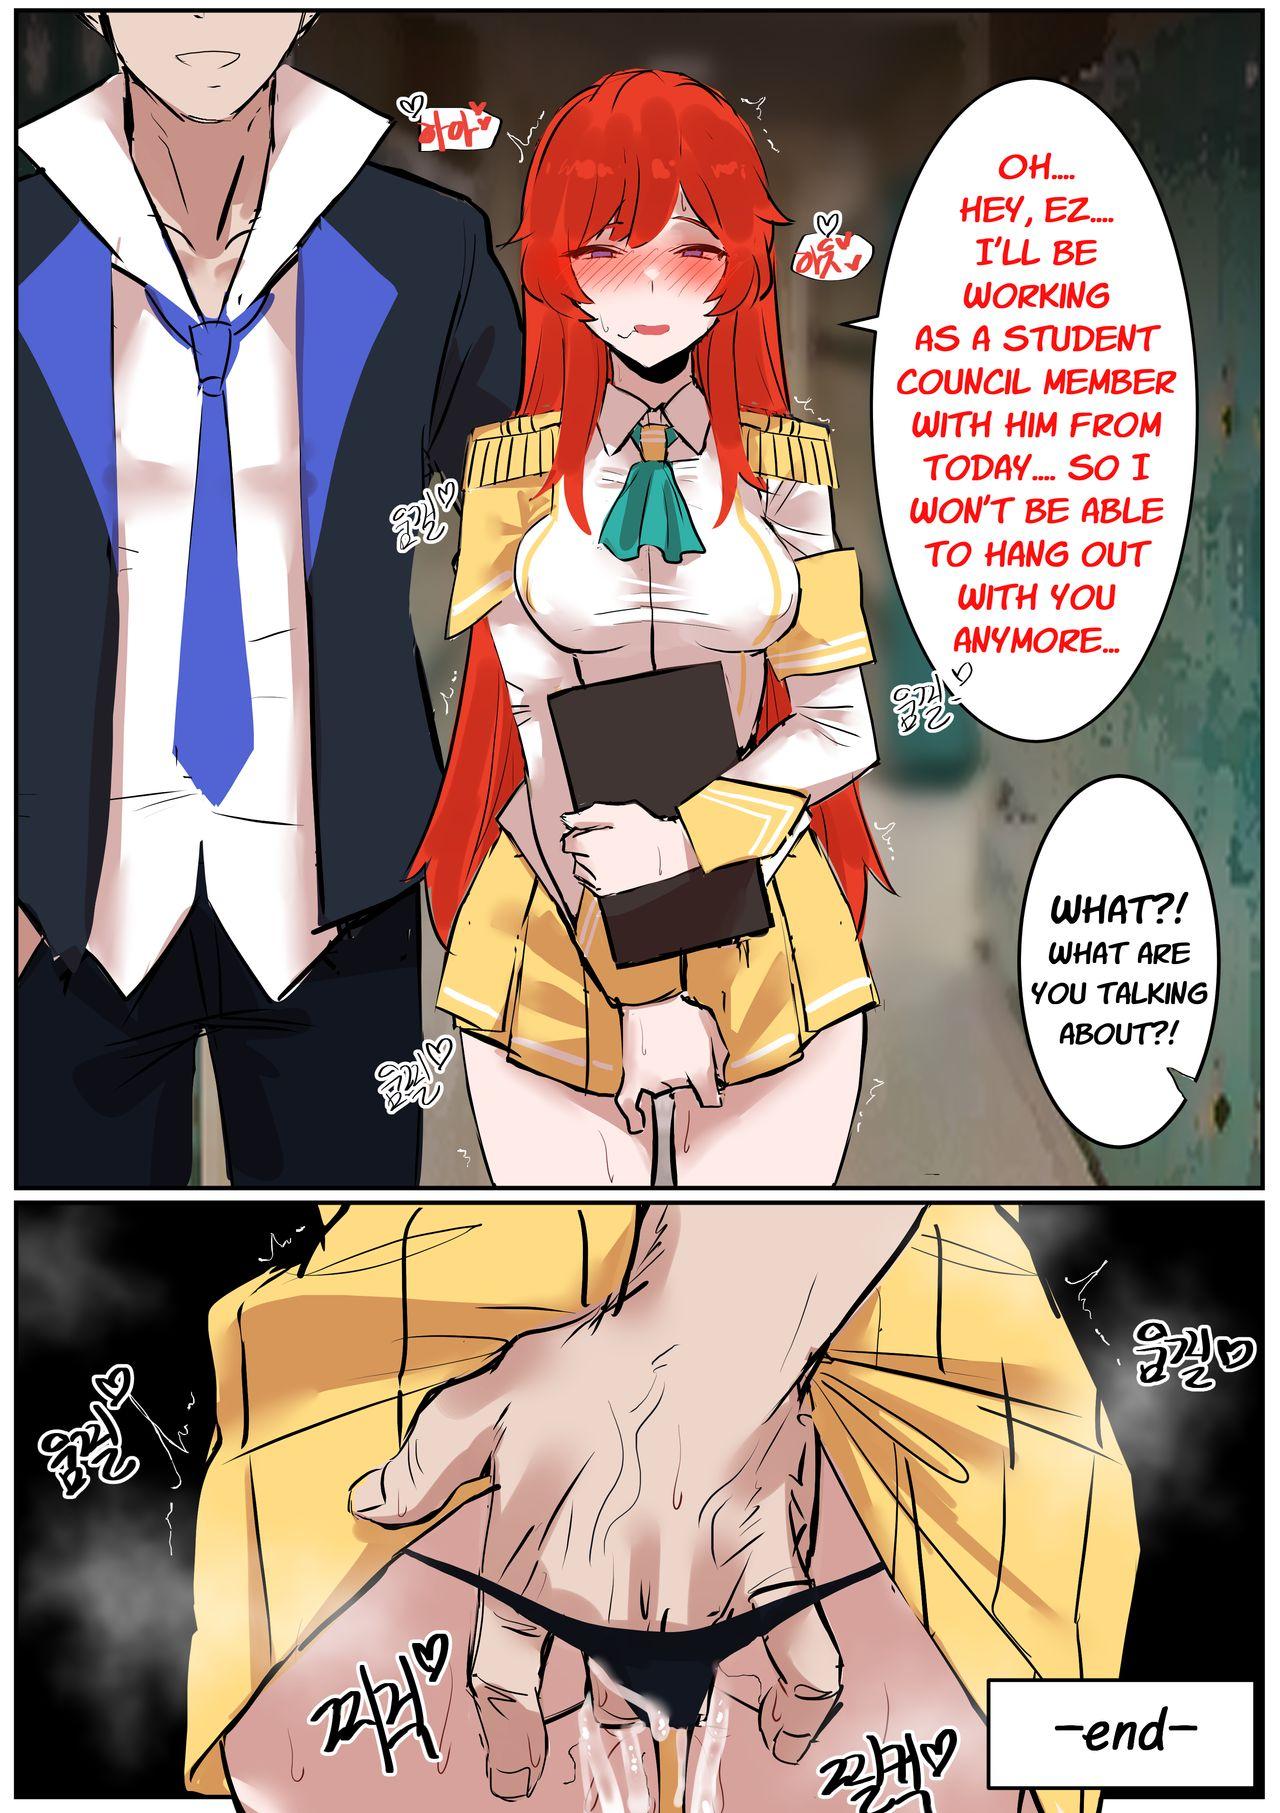 Licking Battle Academia Lux - League of legends One - Page 17